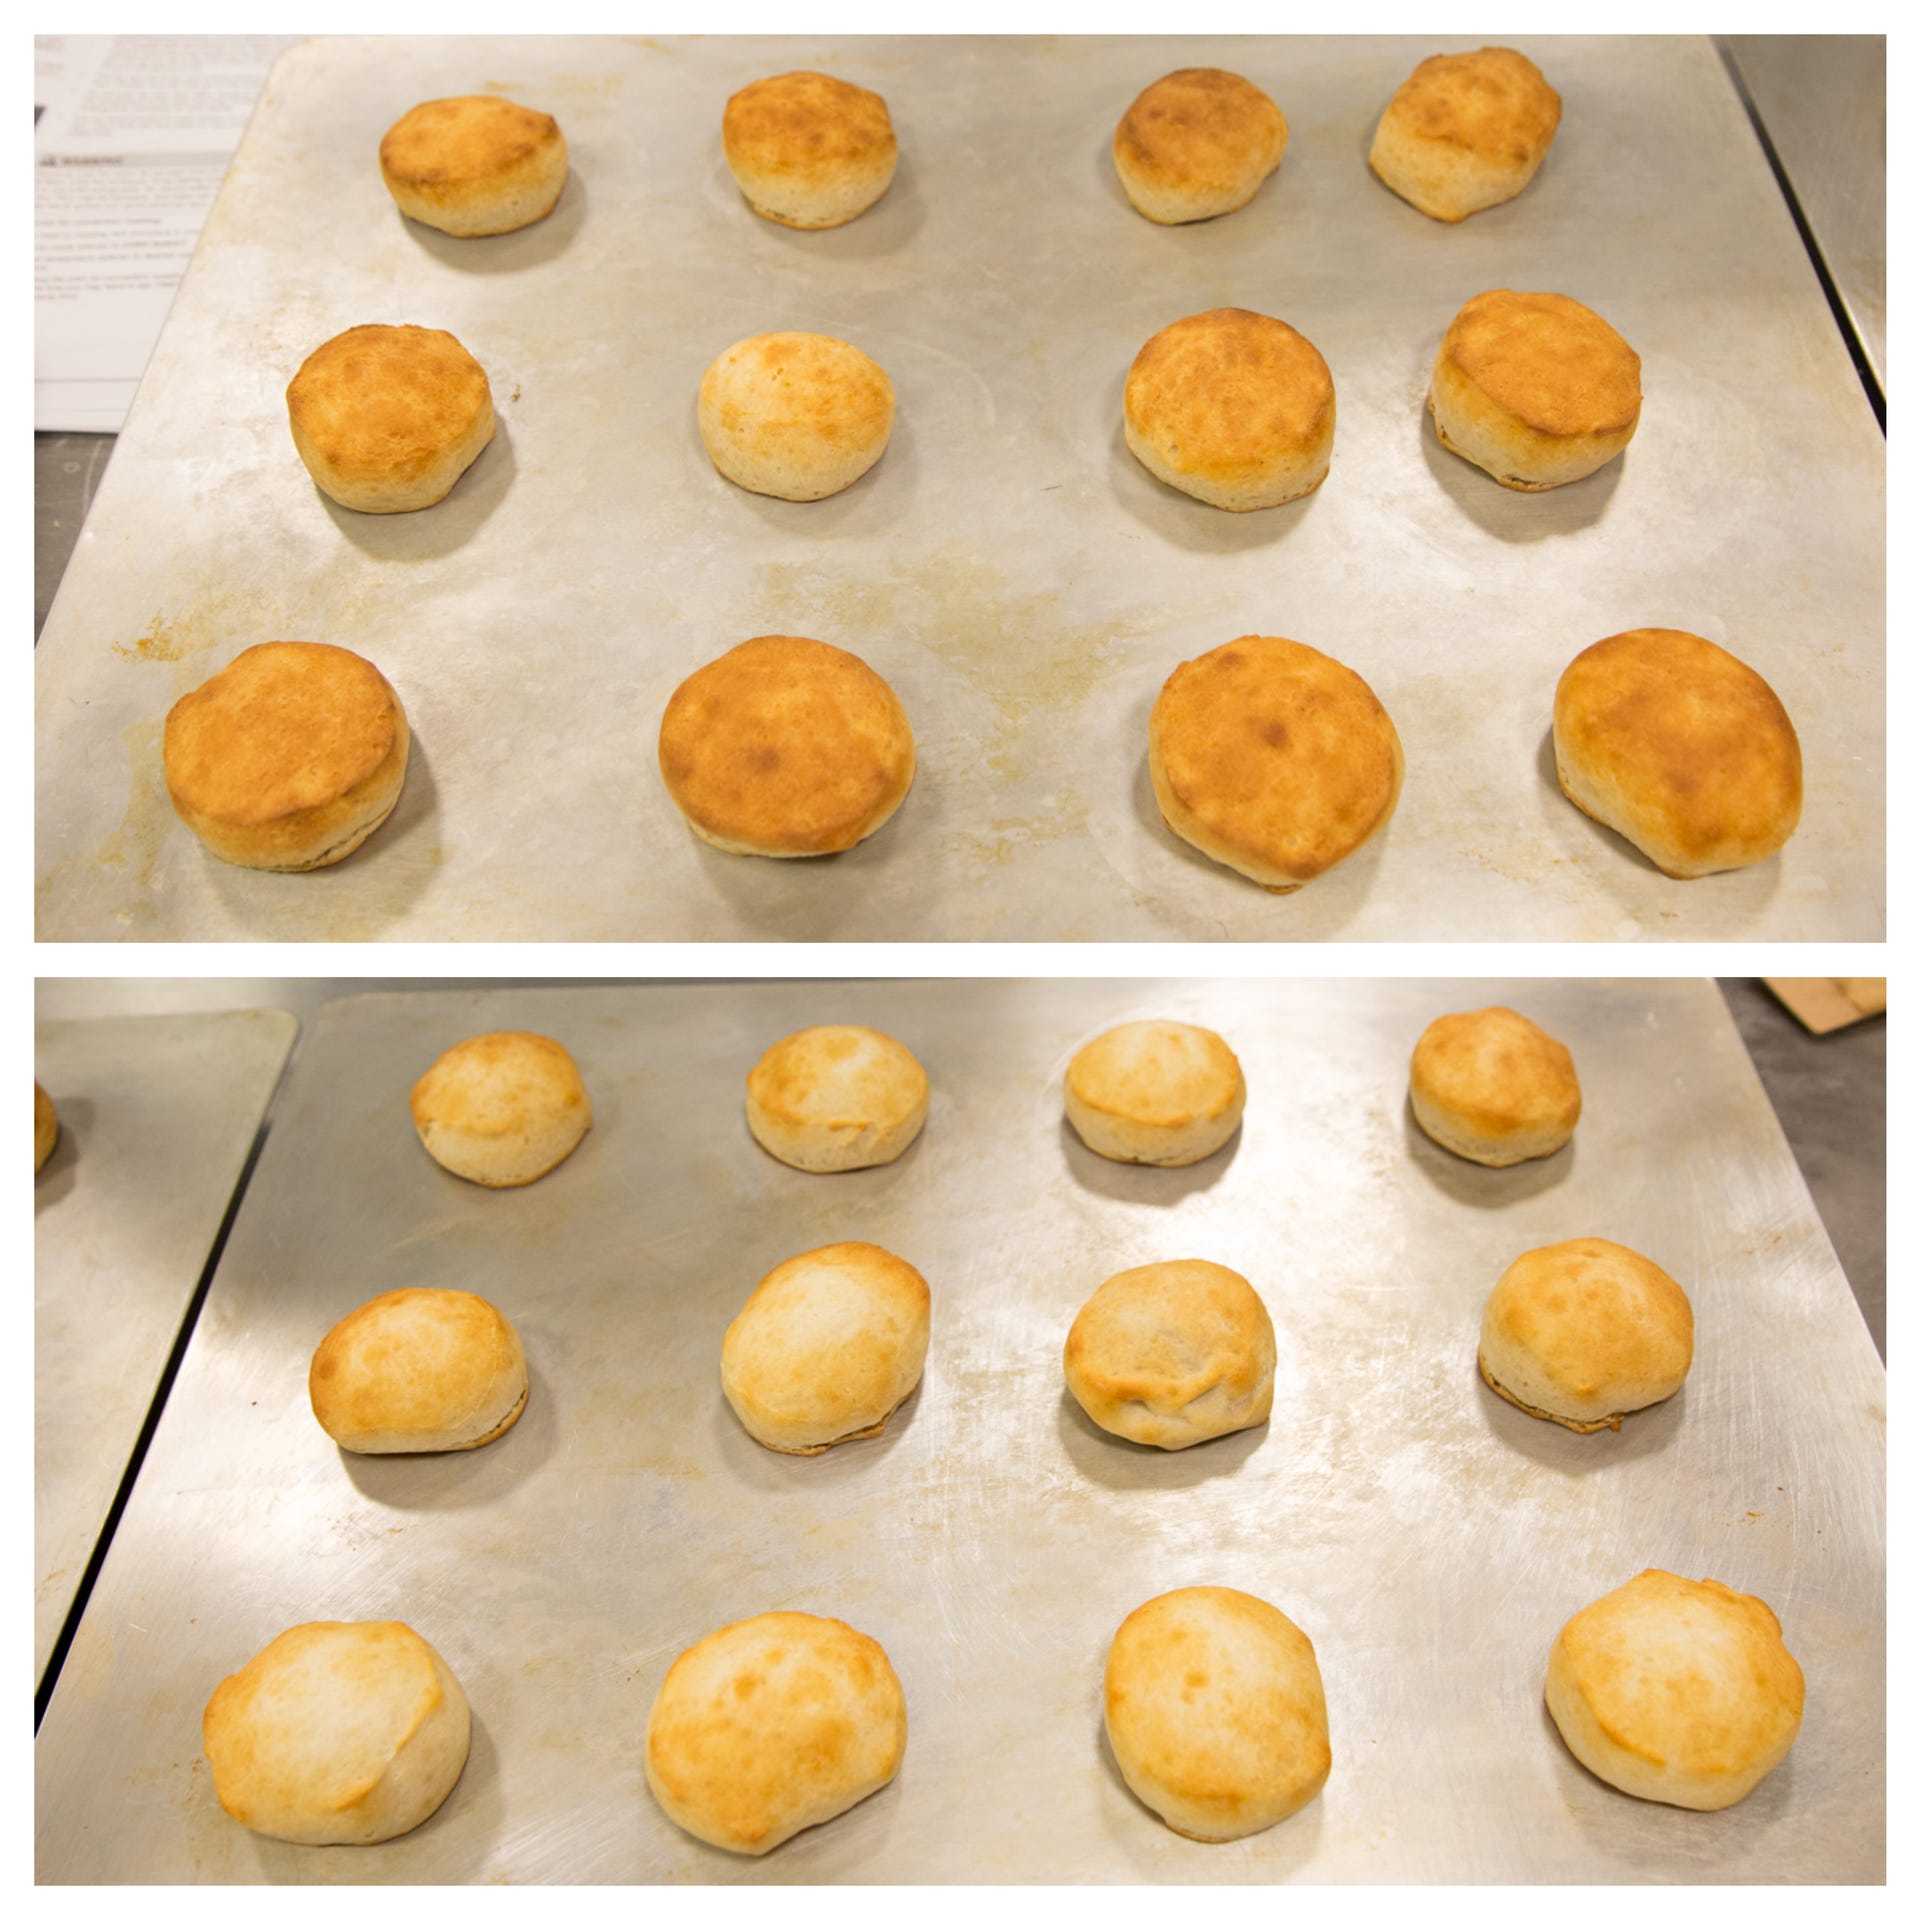 traditional-bake-double-rack-5fotorcollage.jpg